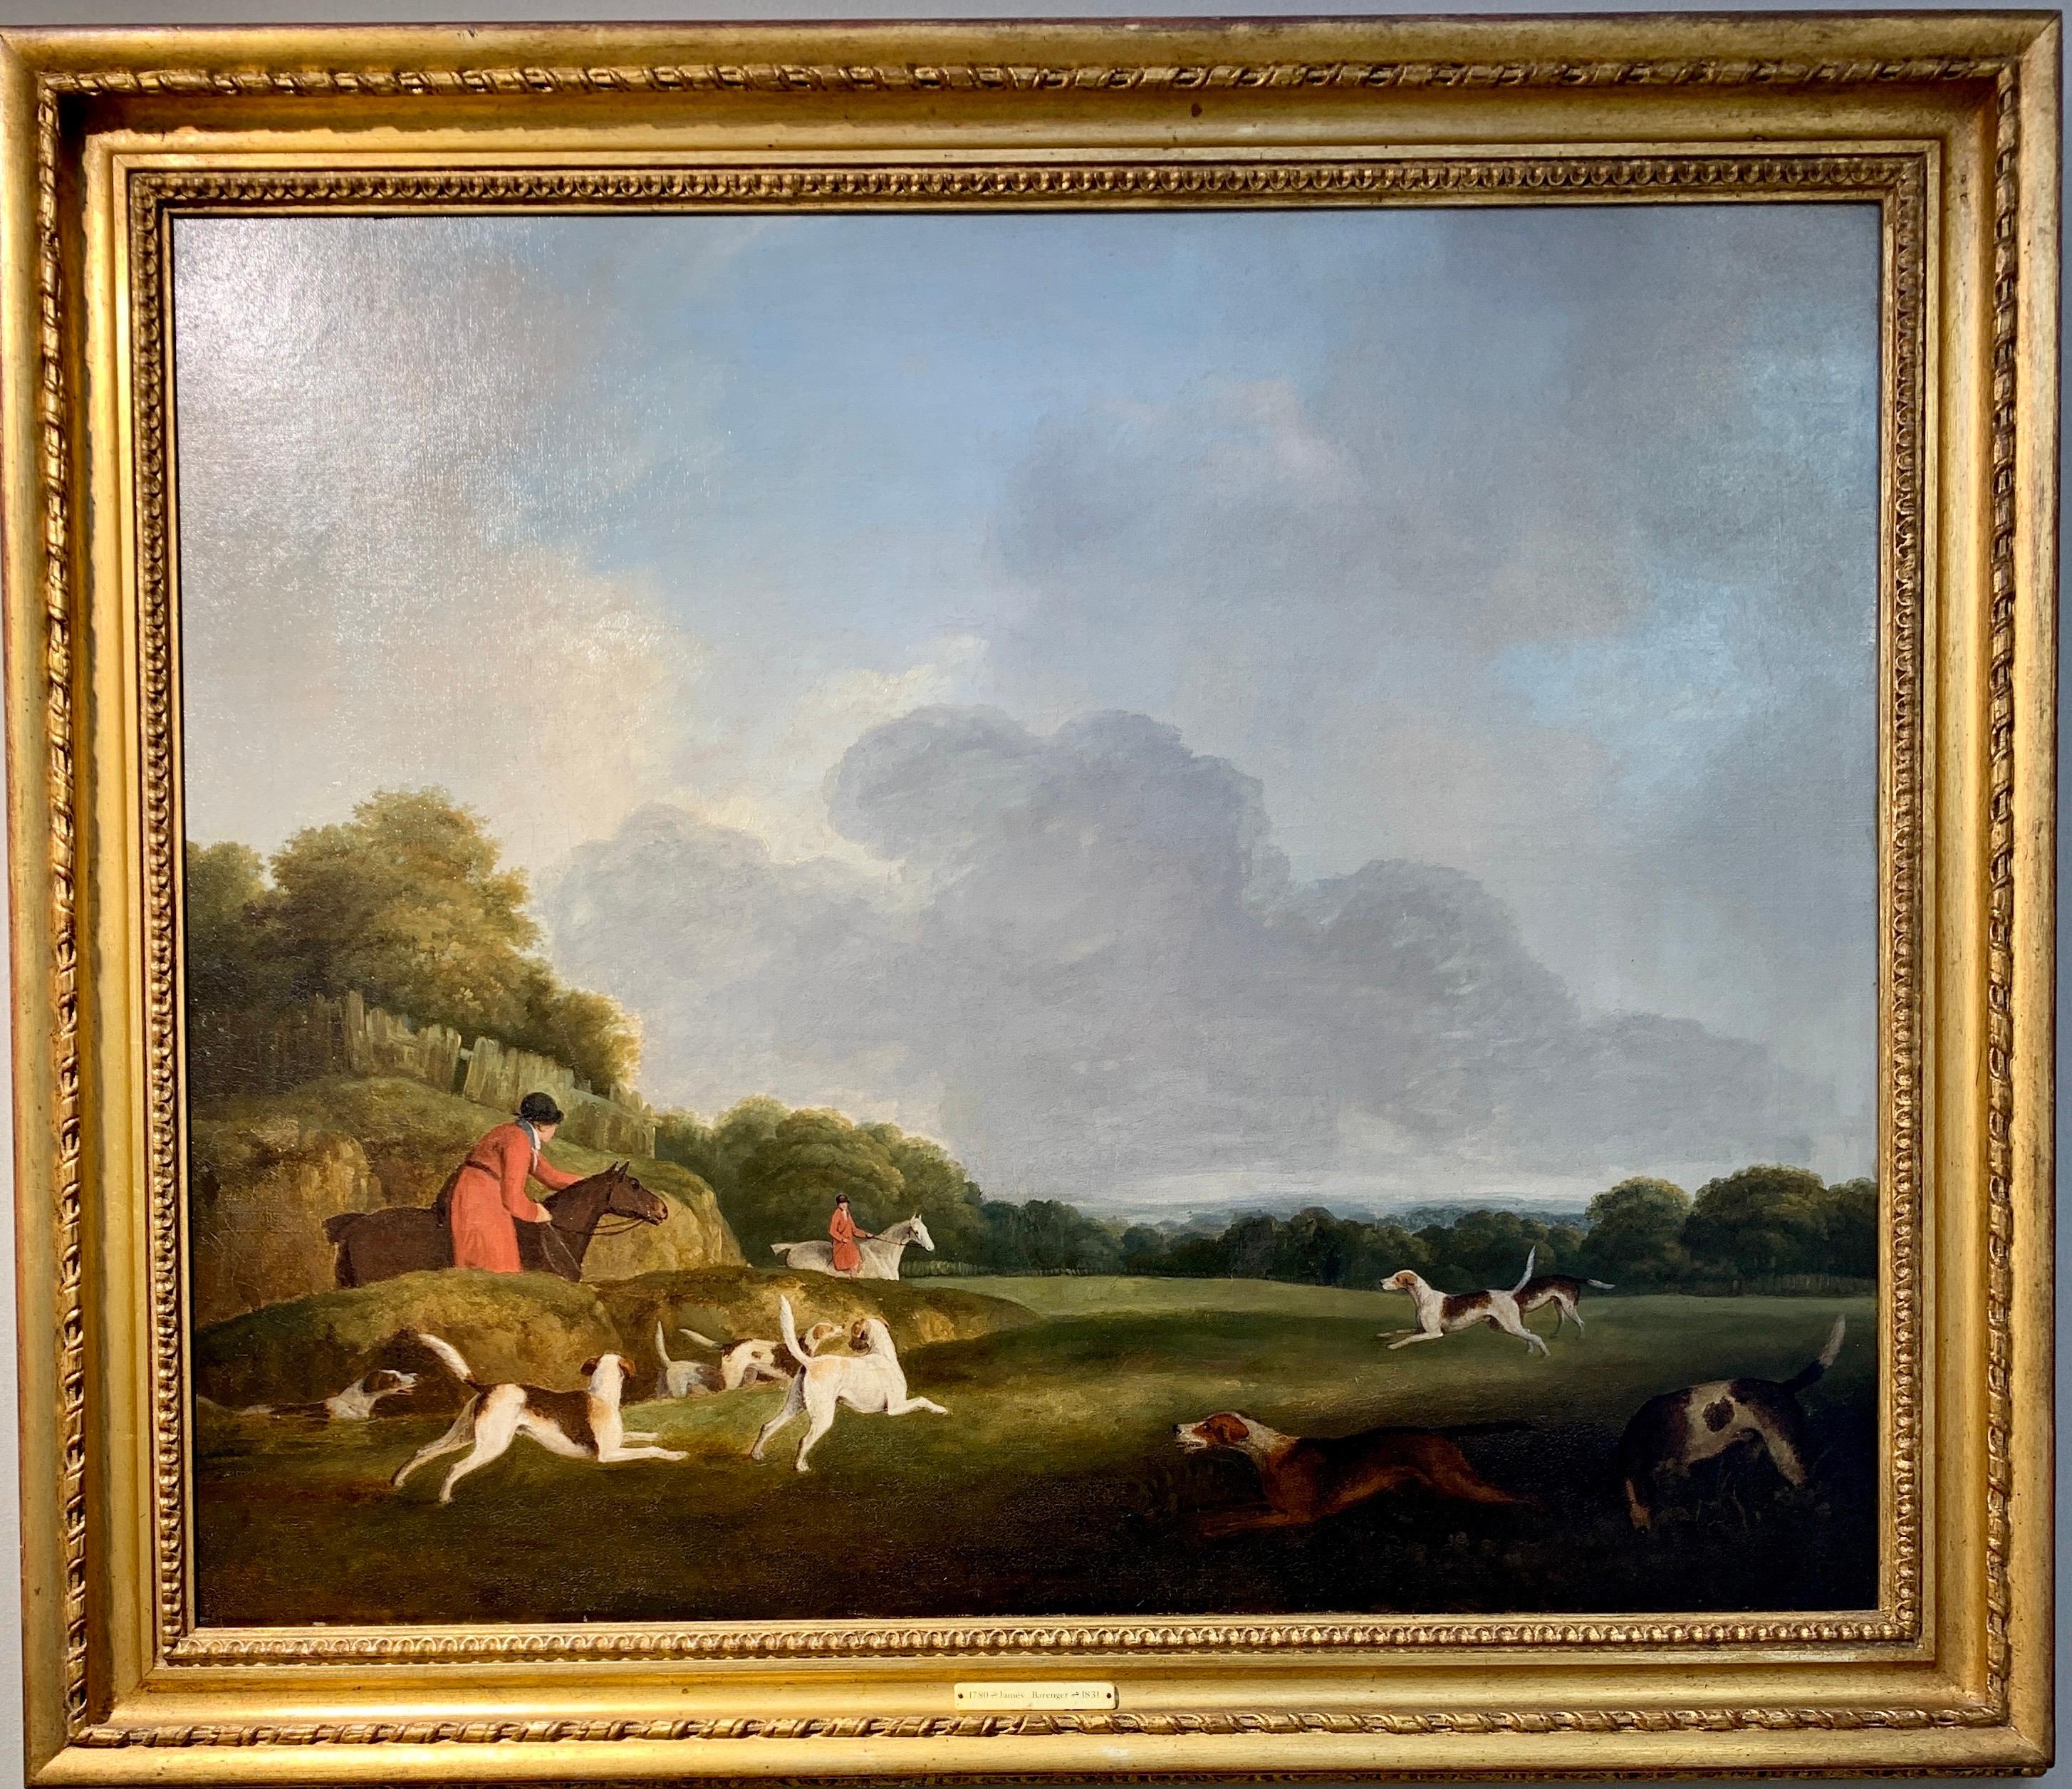 James Barenger Figurative Painting - 19th century English Antique Fox Hunting in a landscape, with hounds and horses.
